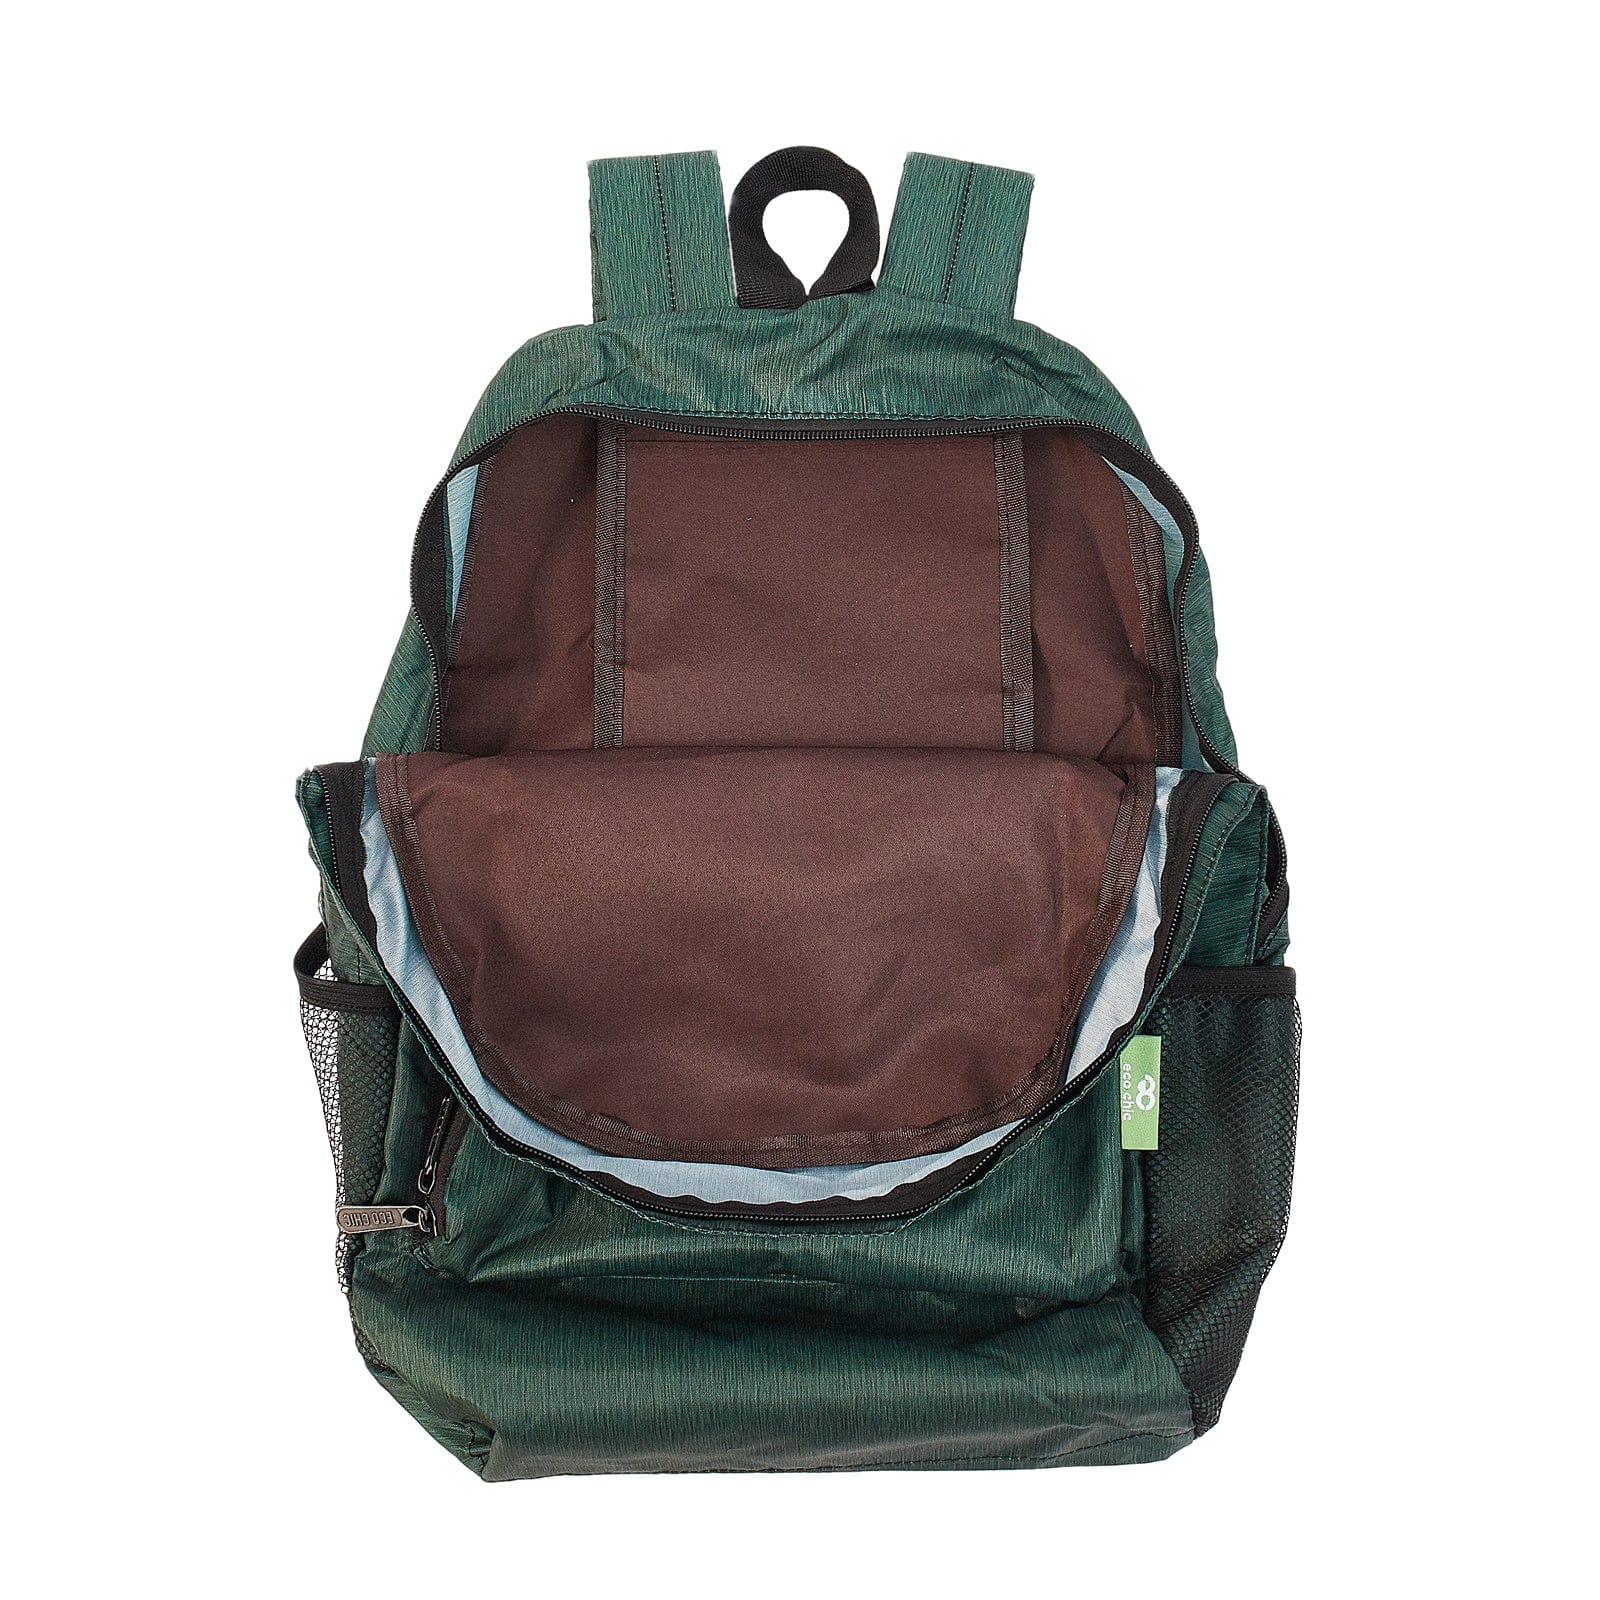 Eco Chic Eco Chic Lightweight Foldable Backpack Pine Green